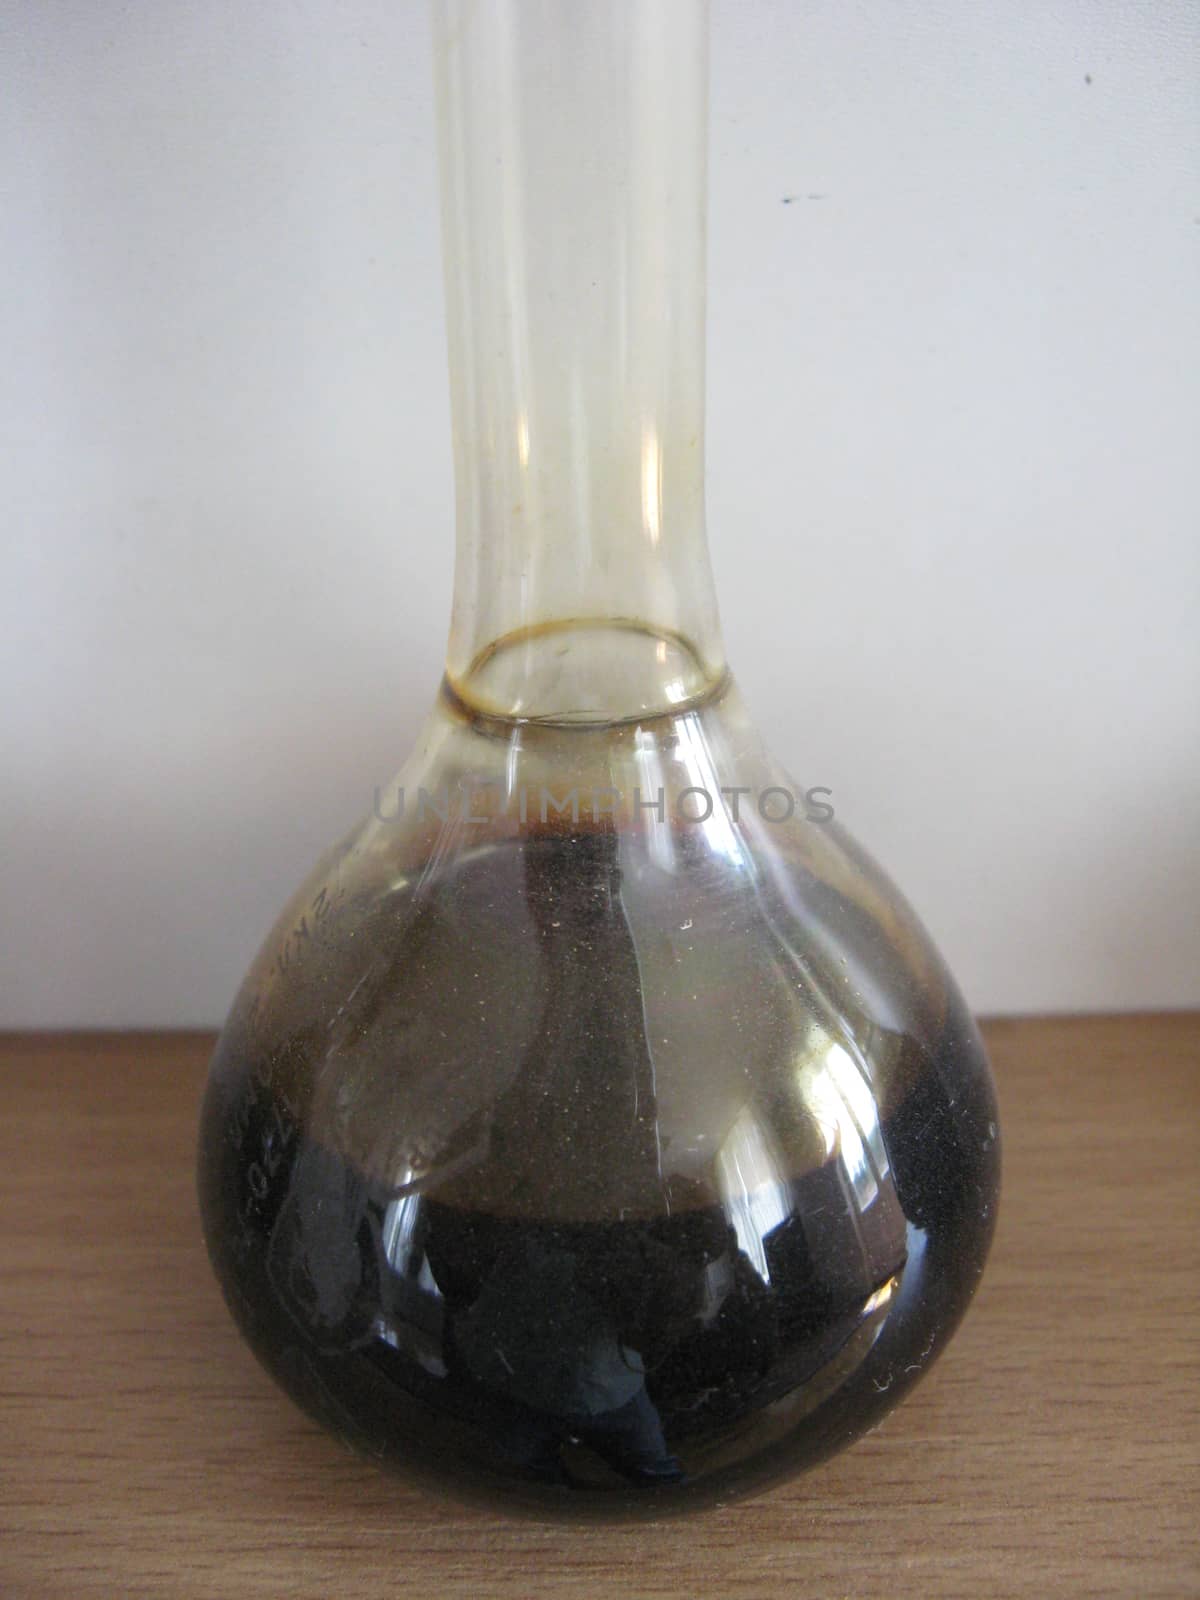 sample of oil in a flask by alexmak